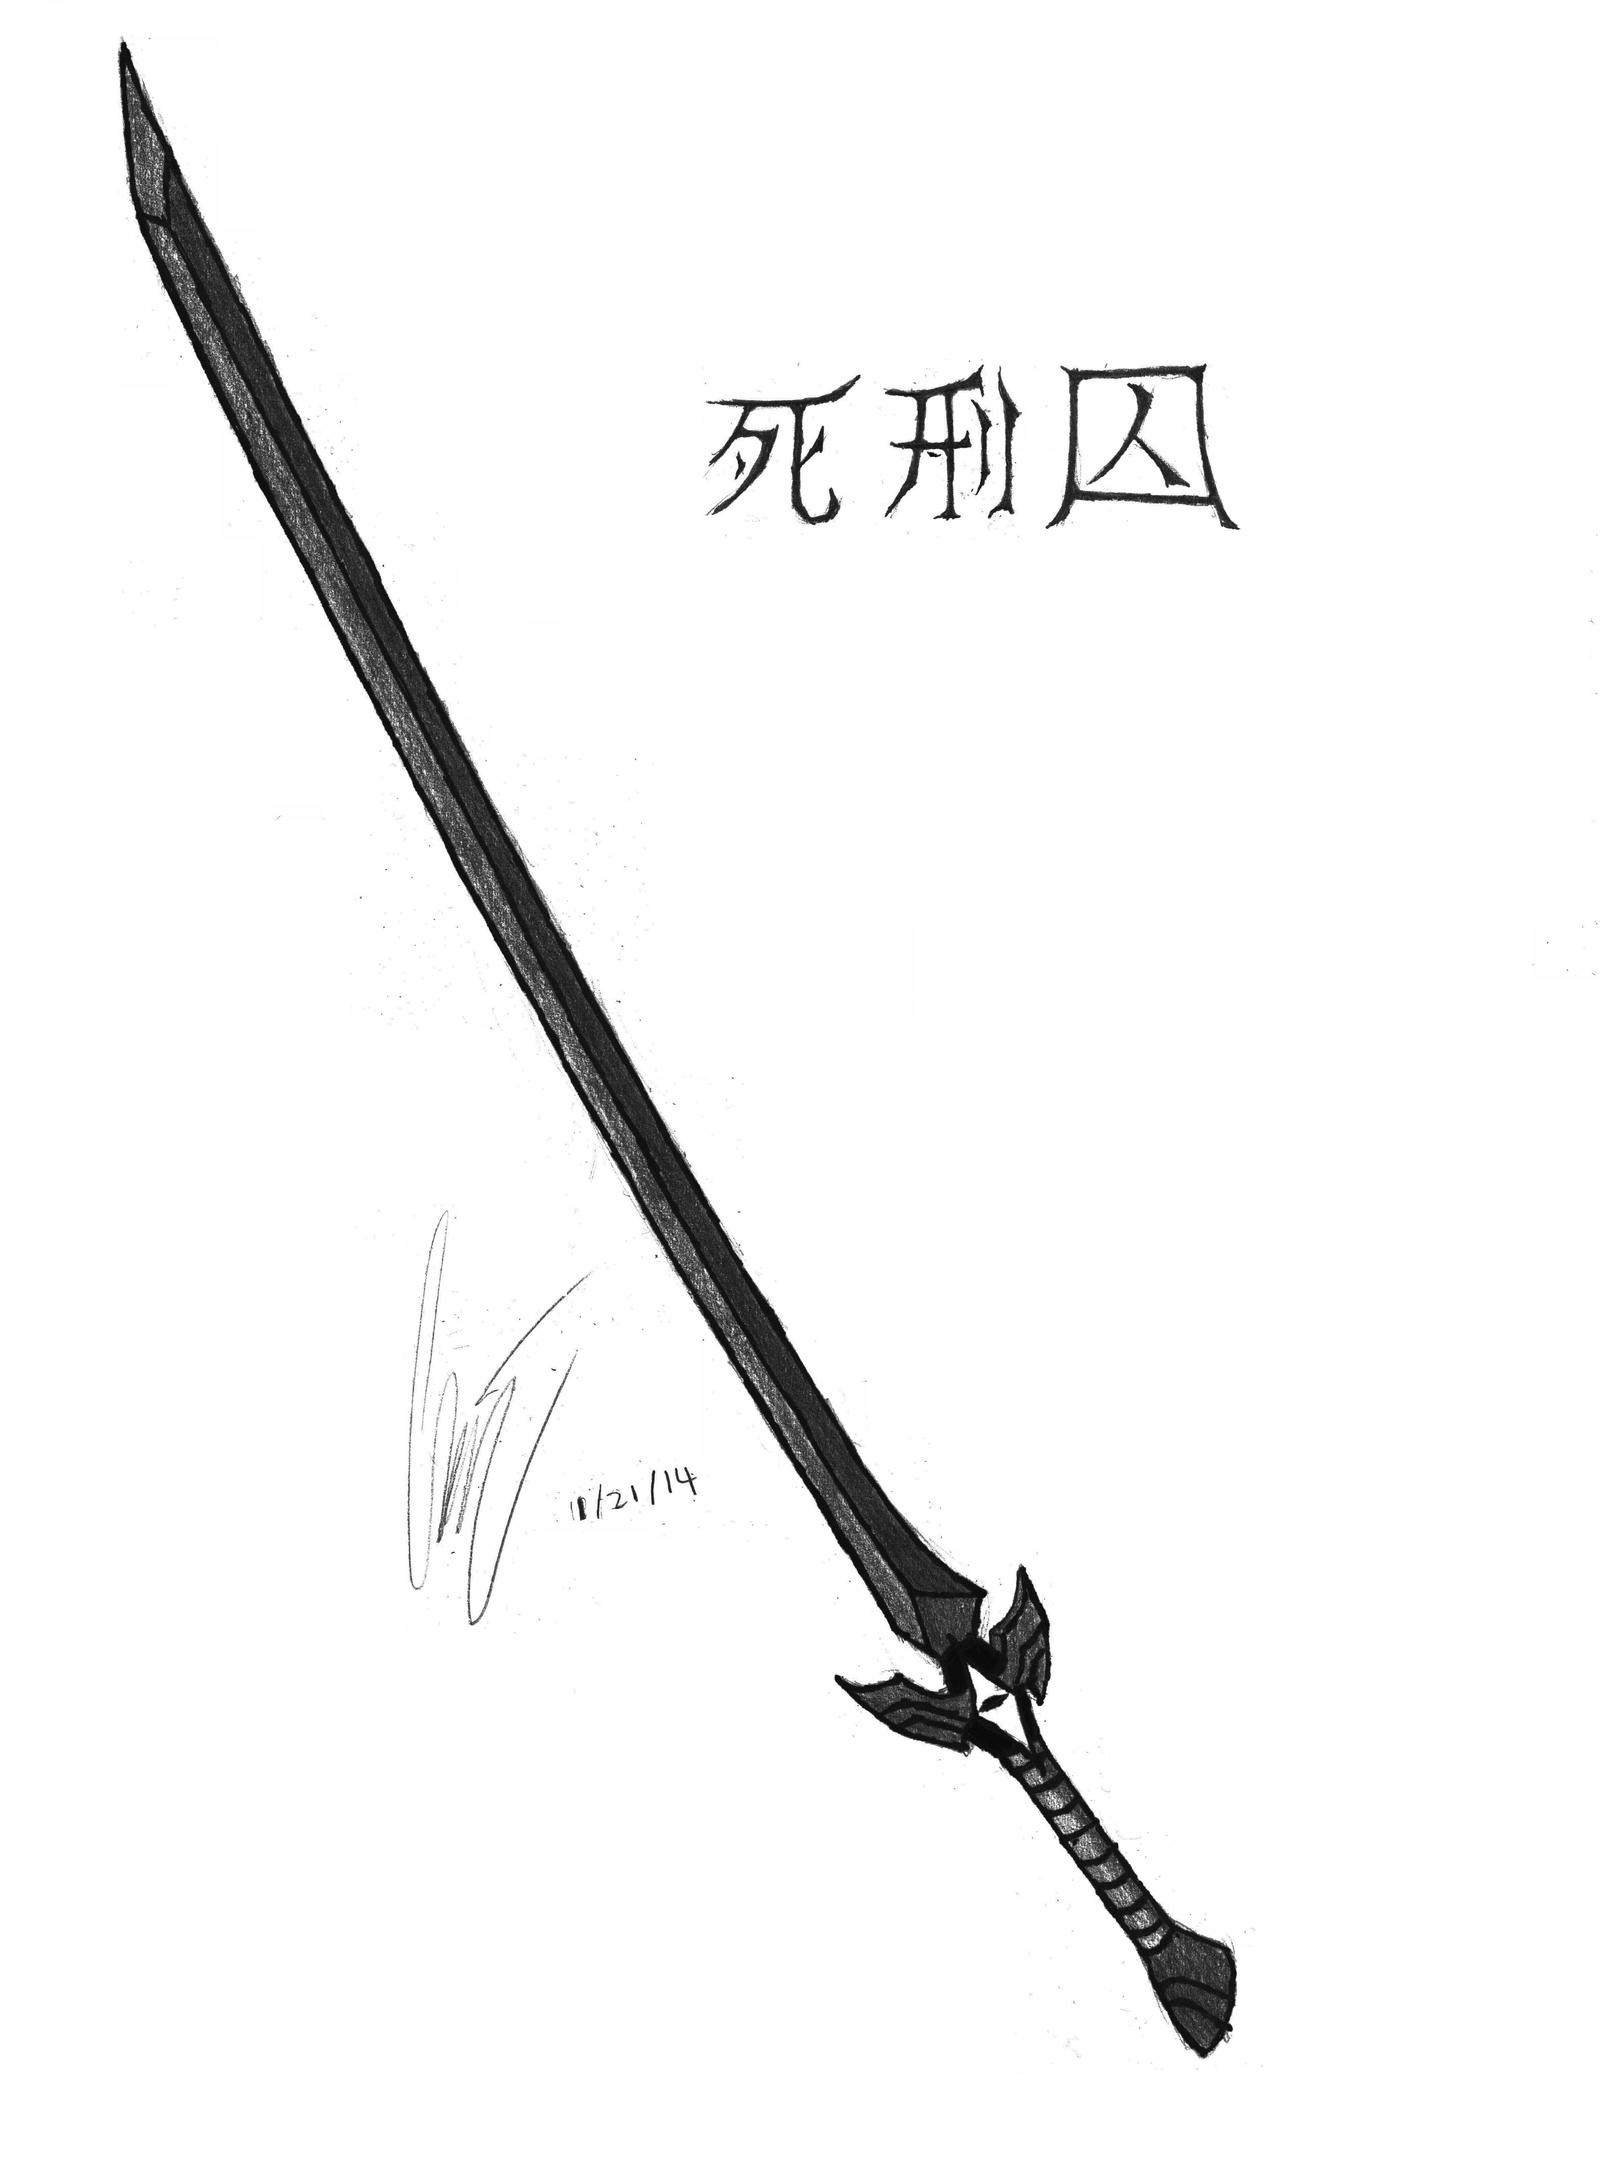 Shikeishu, the Condemned Sword